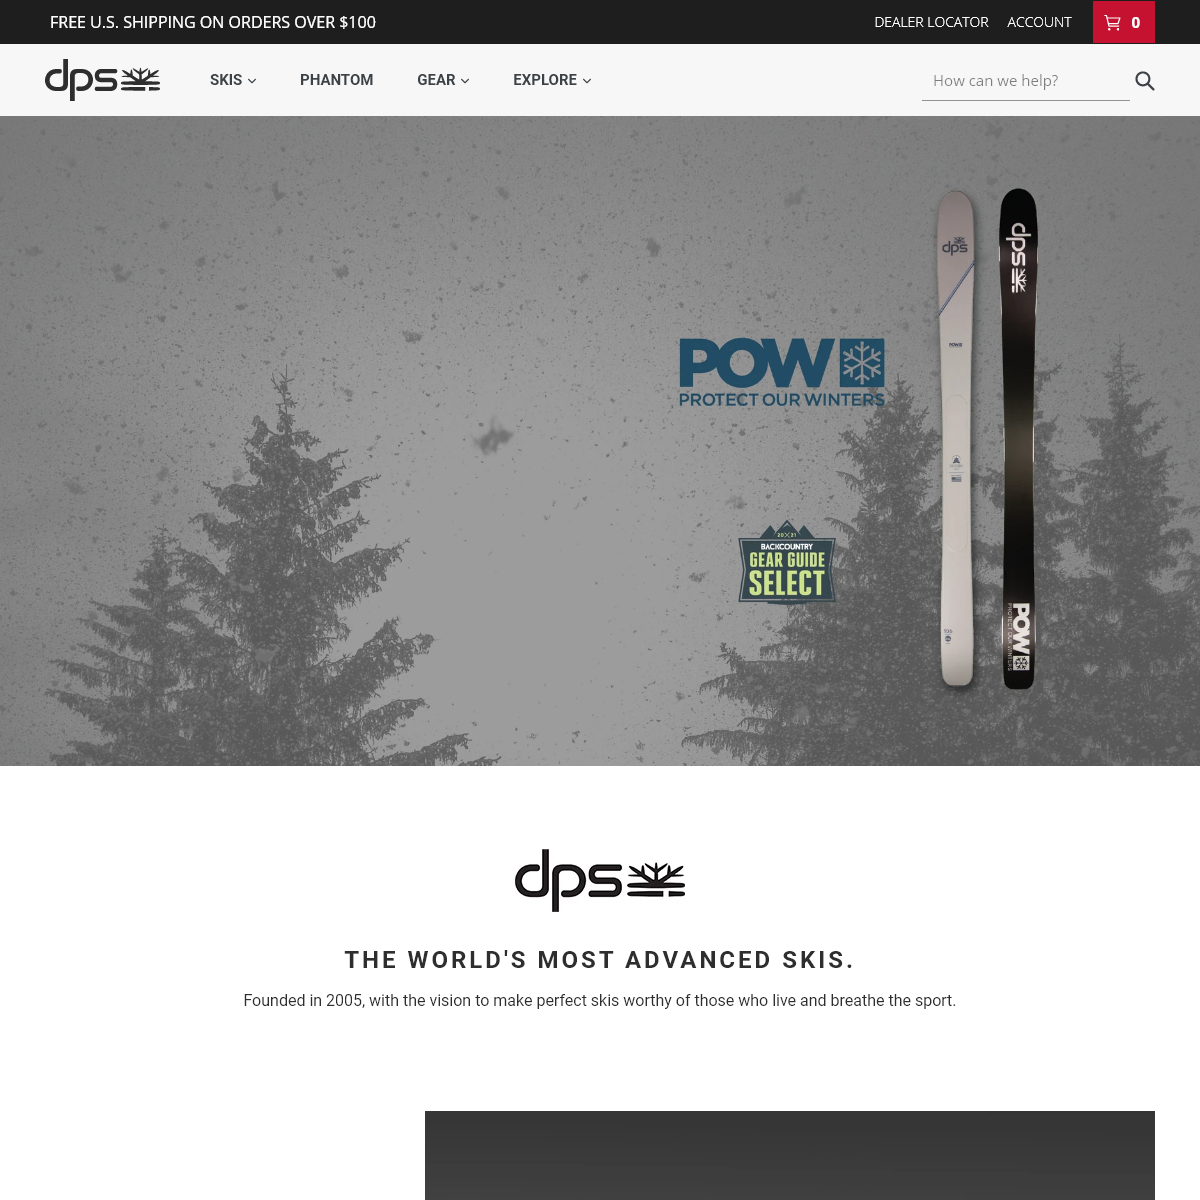 A complete backup of dpsskis.com